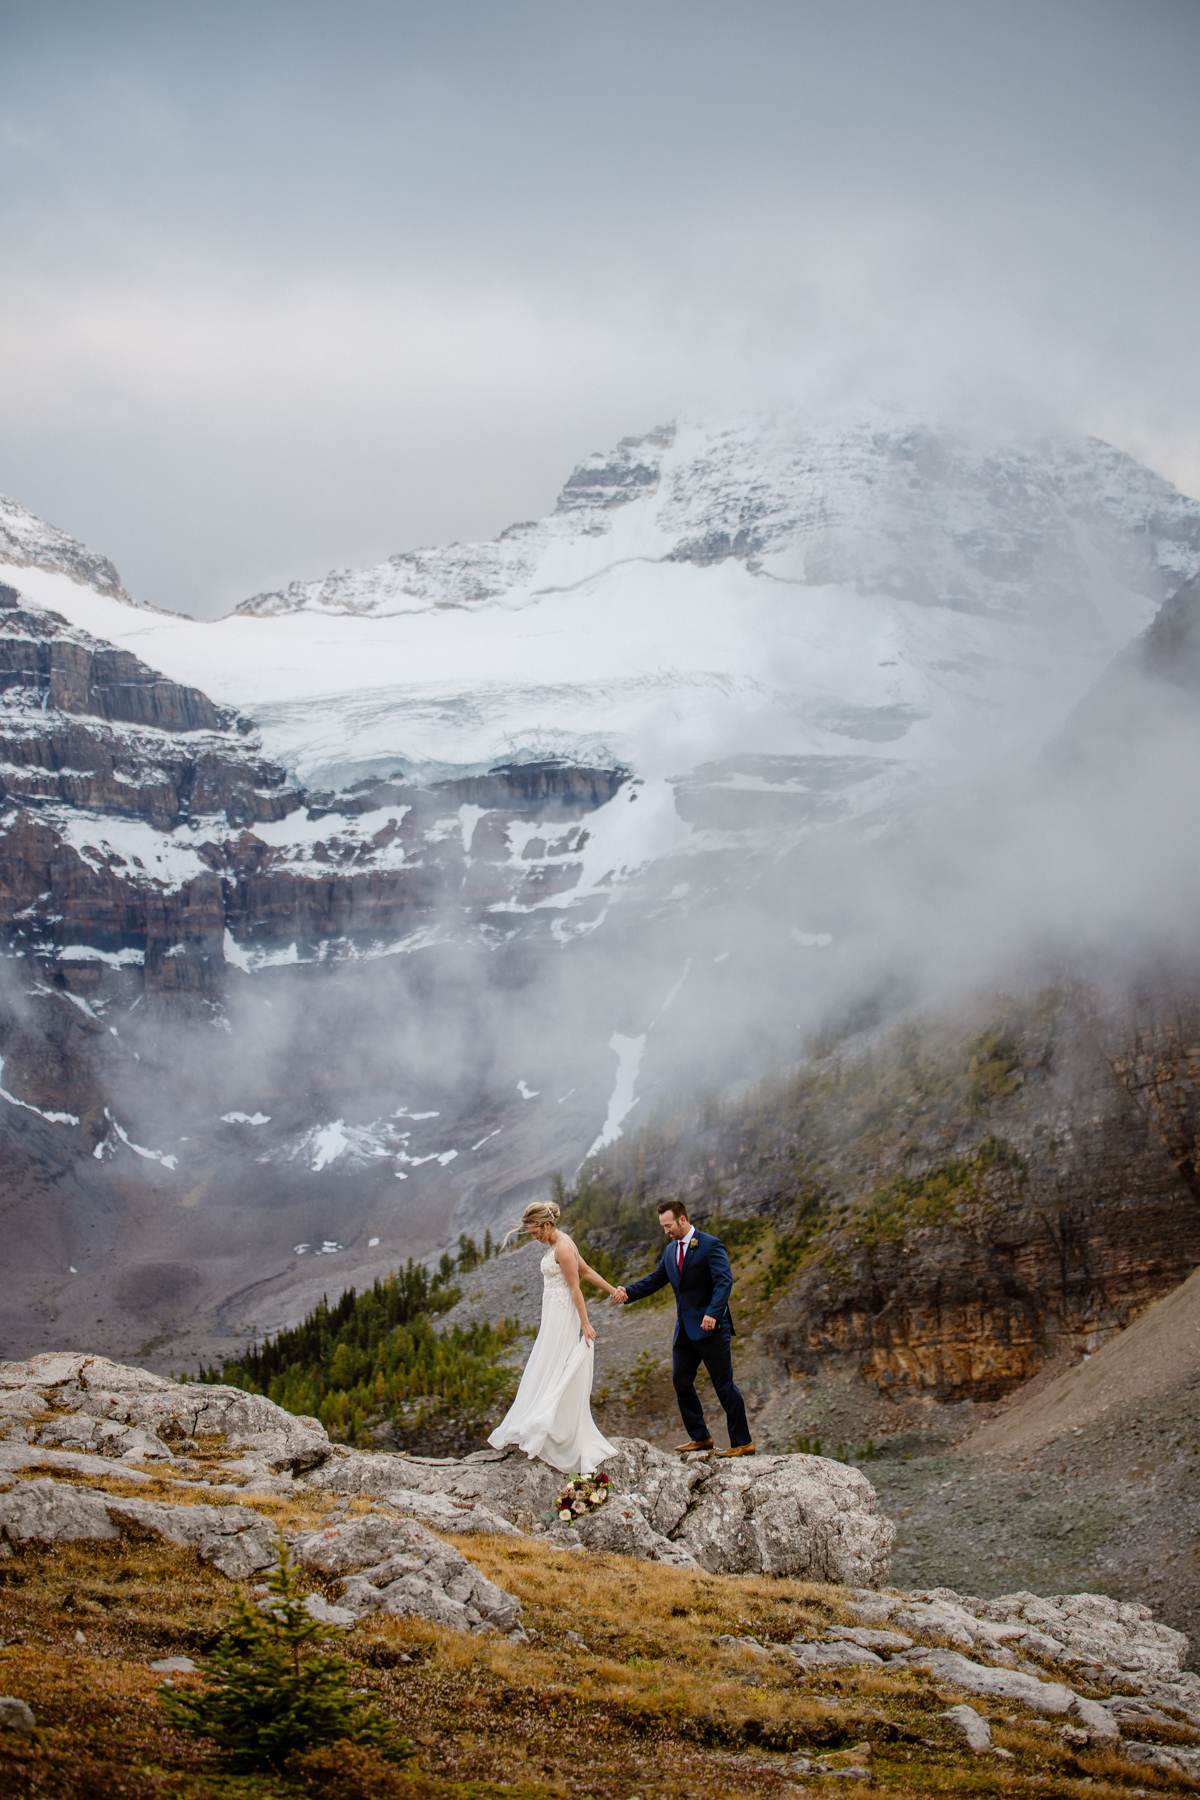 Mount Assiniboine Elopement Photographers at a Backcountry Lodge - Photo 28